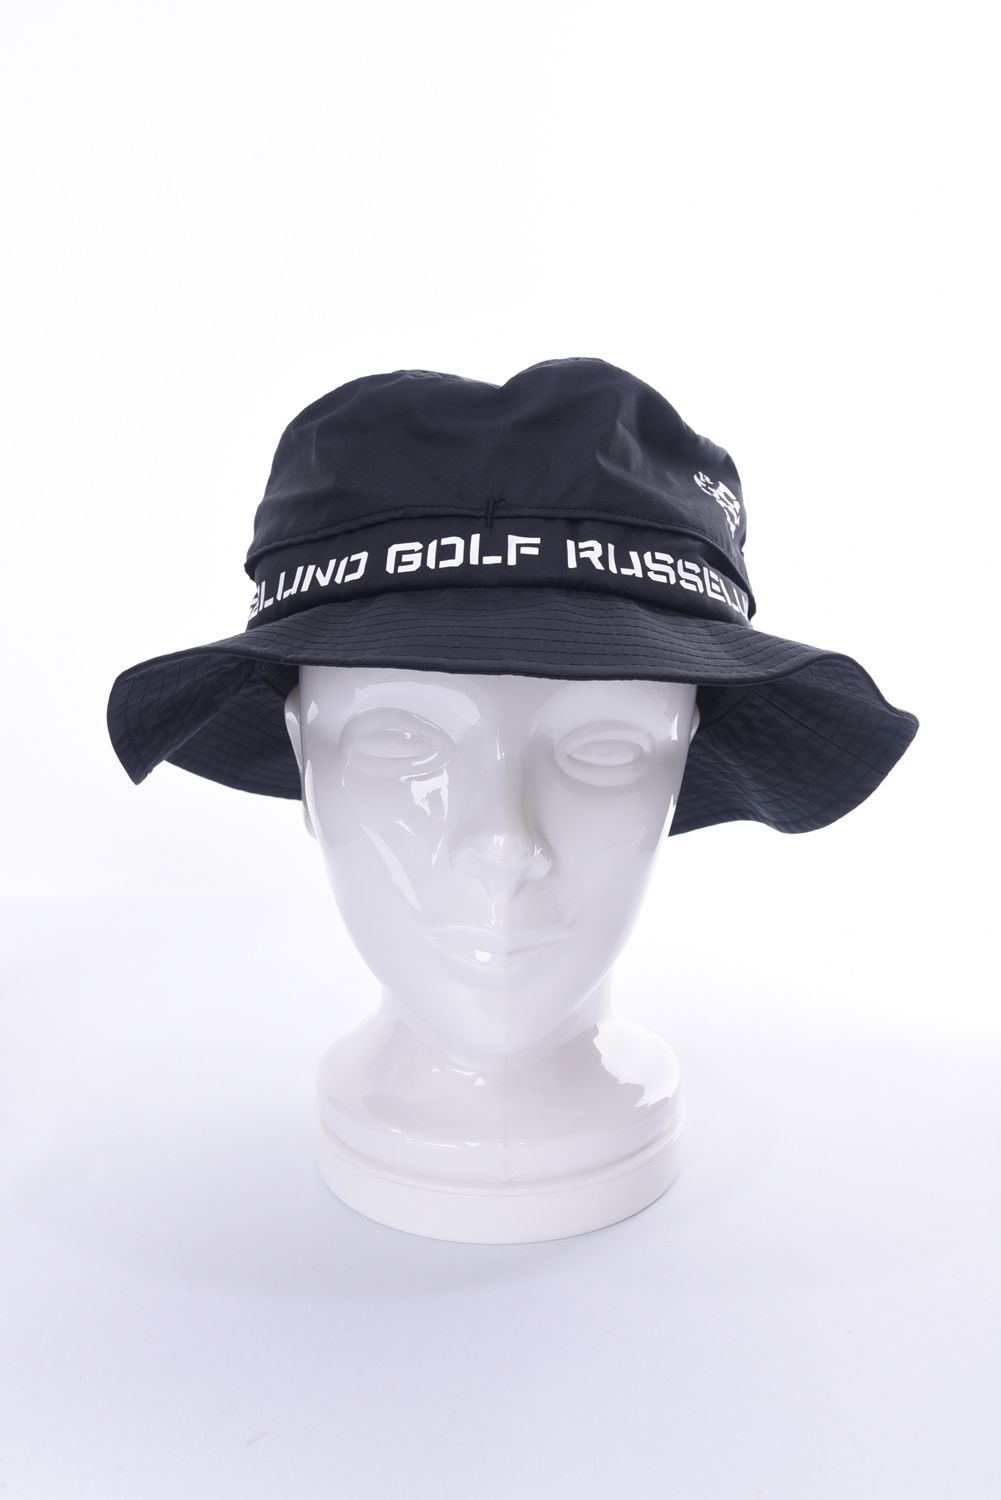 RUSSELUNO - PACKABLE HAT / ブランドロゴ パッカブル仕様 ハット 